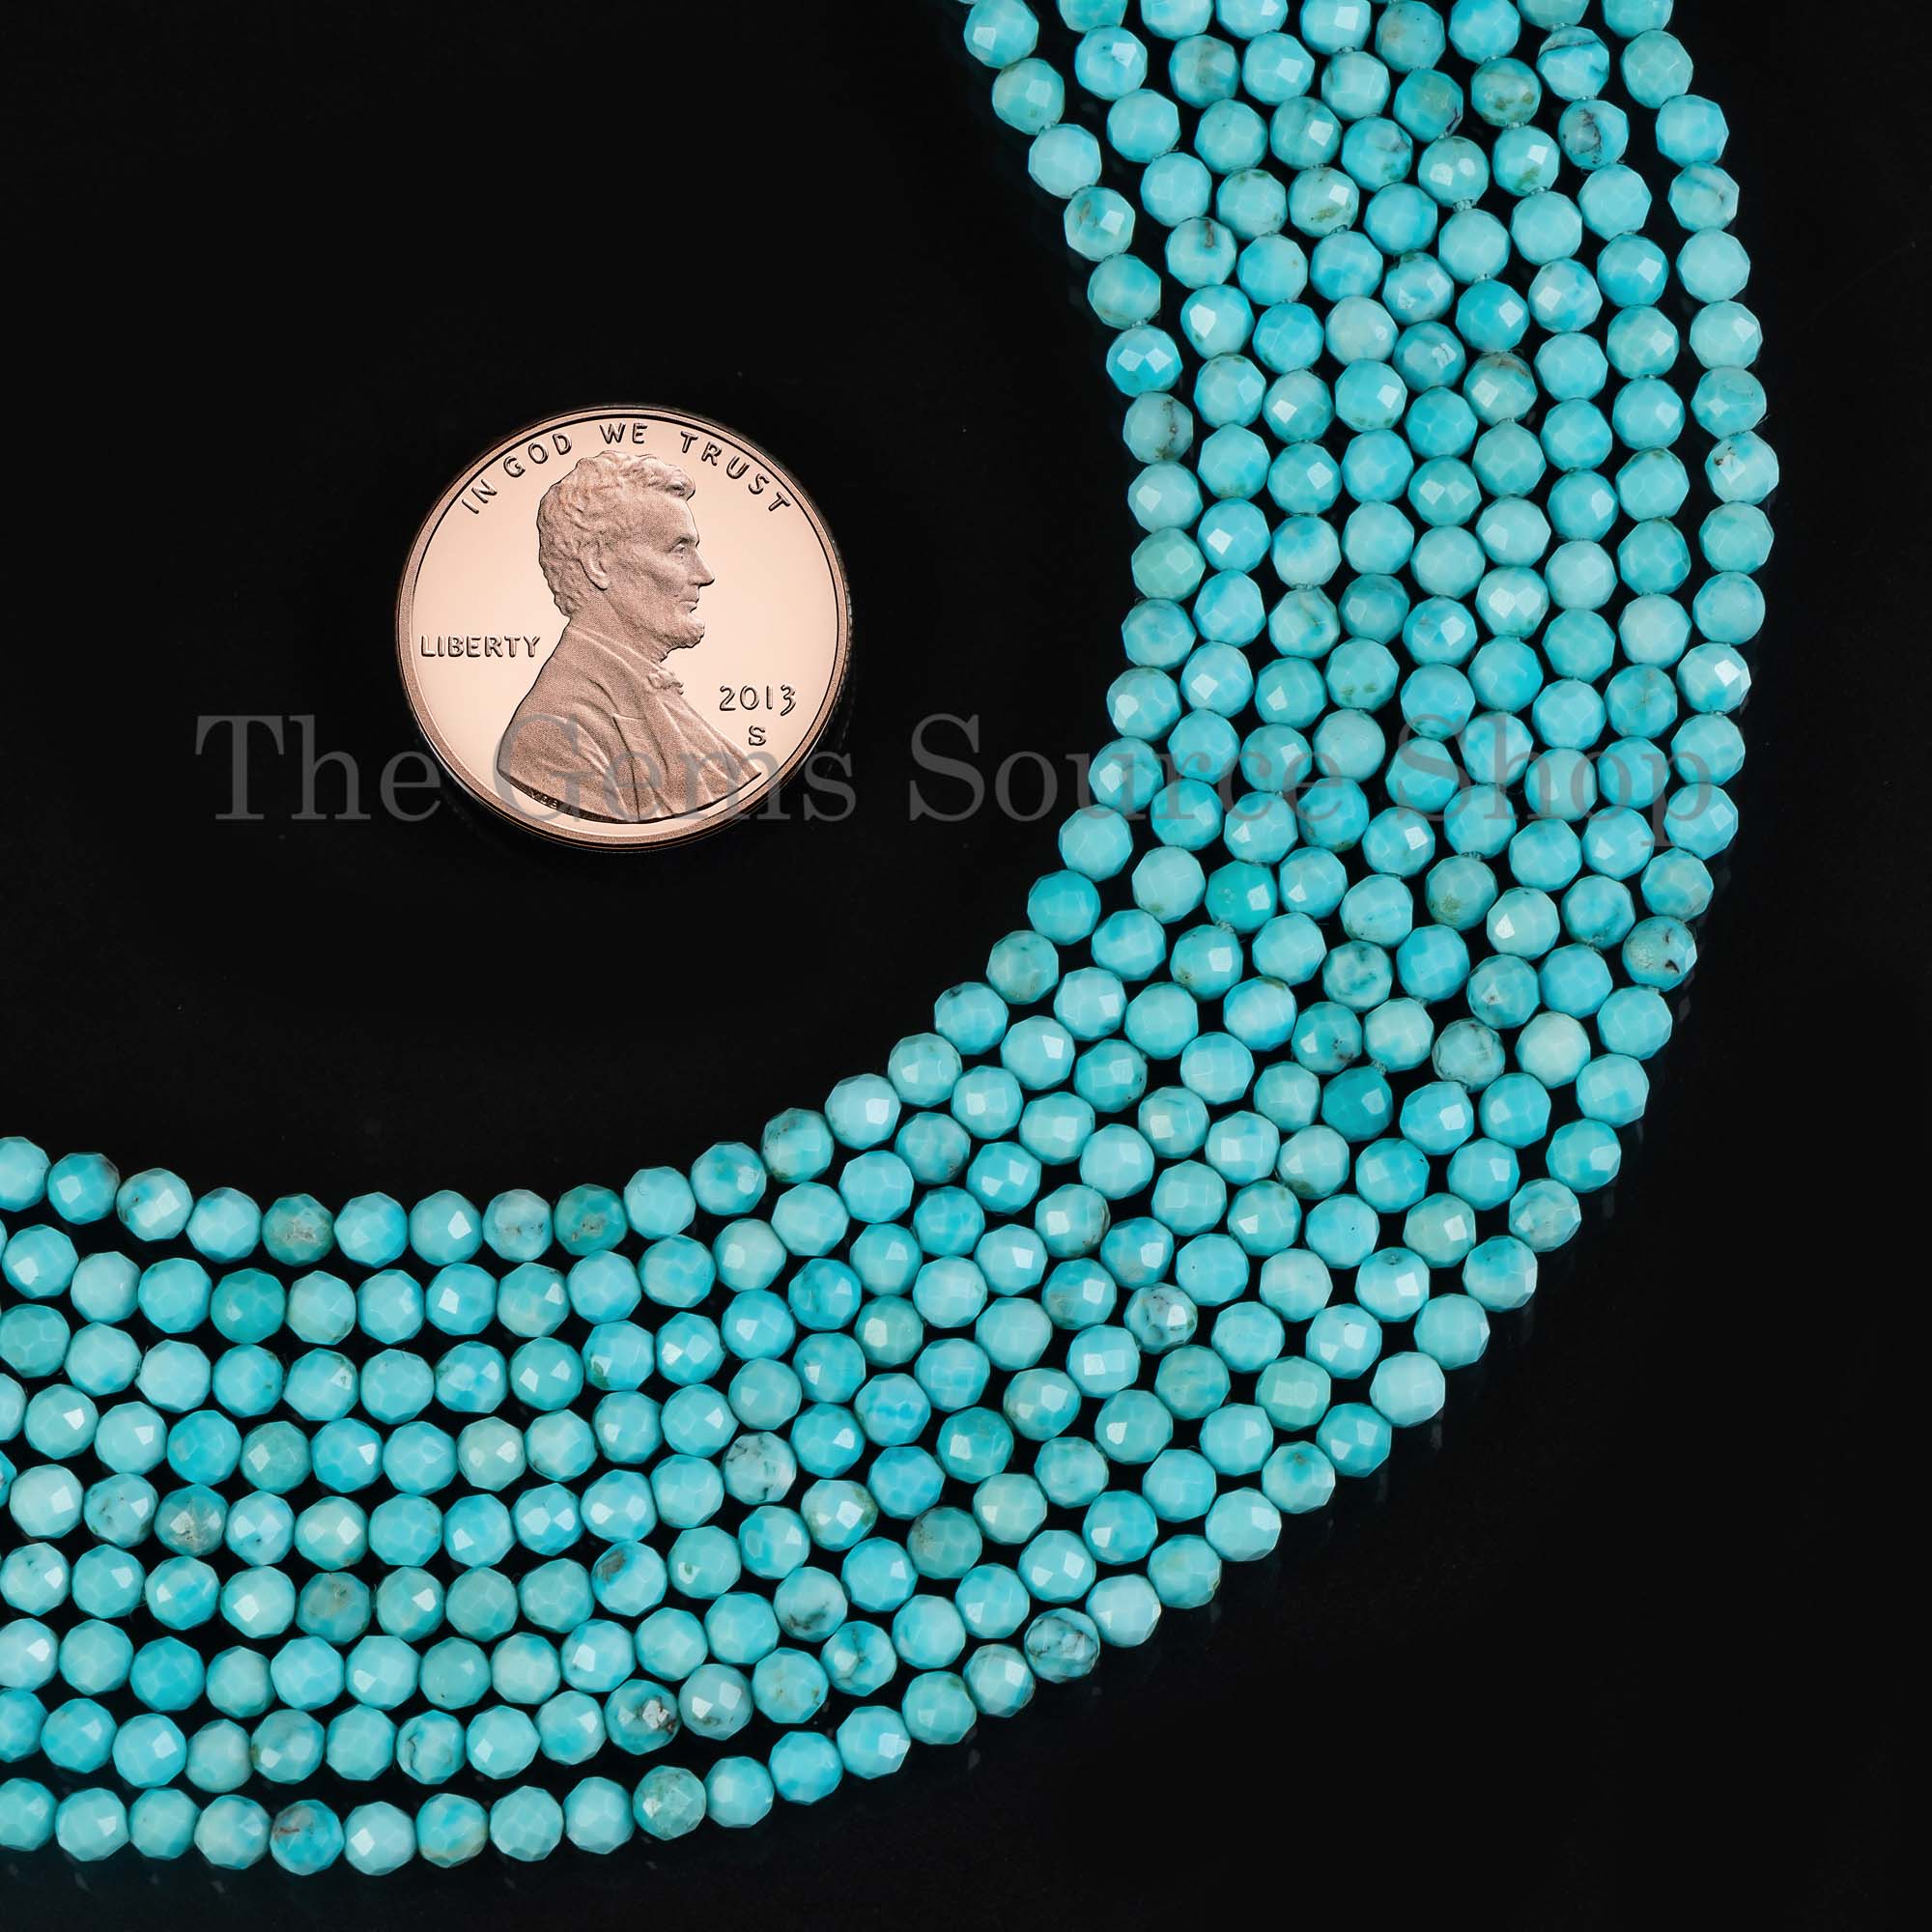 3mm Turquoise Faceted Round Beads, Turquoise Beads, Faceted Turquoise Beads, Turquoise Round Beads, Round Beads, Turquoise Gemstone Beads